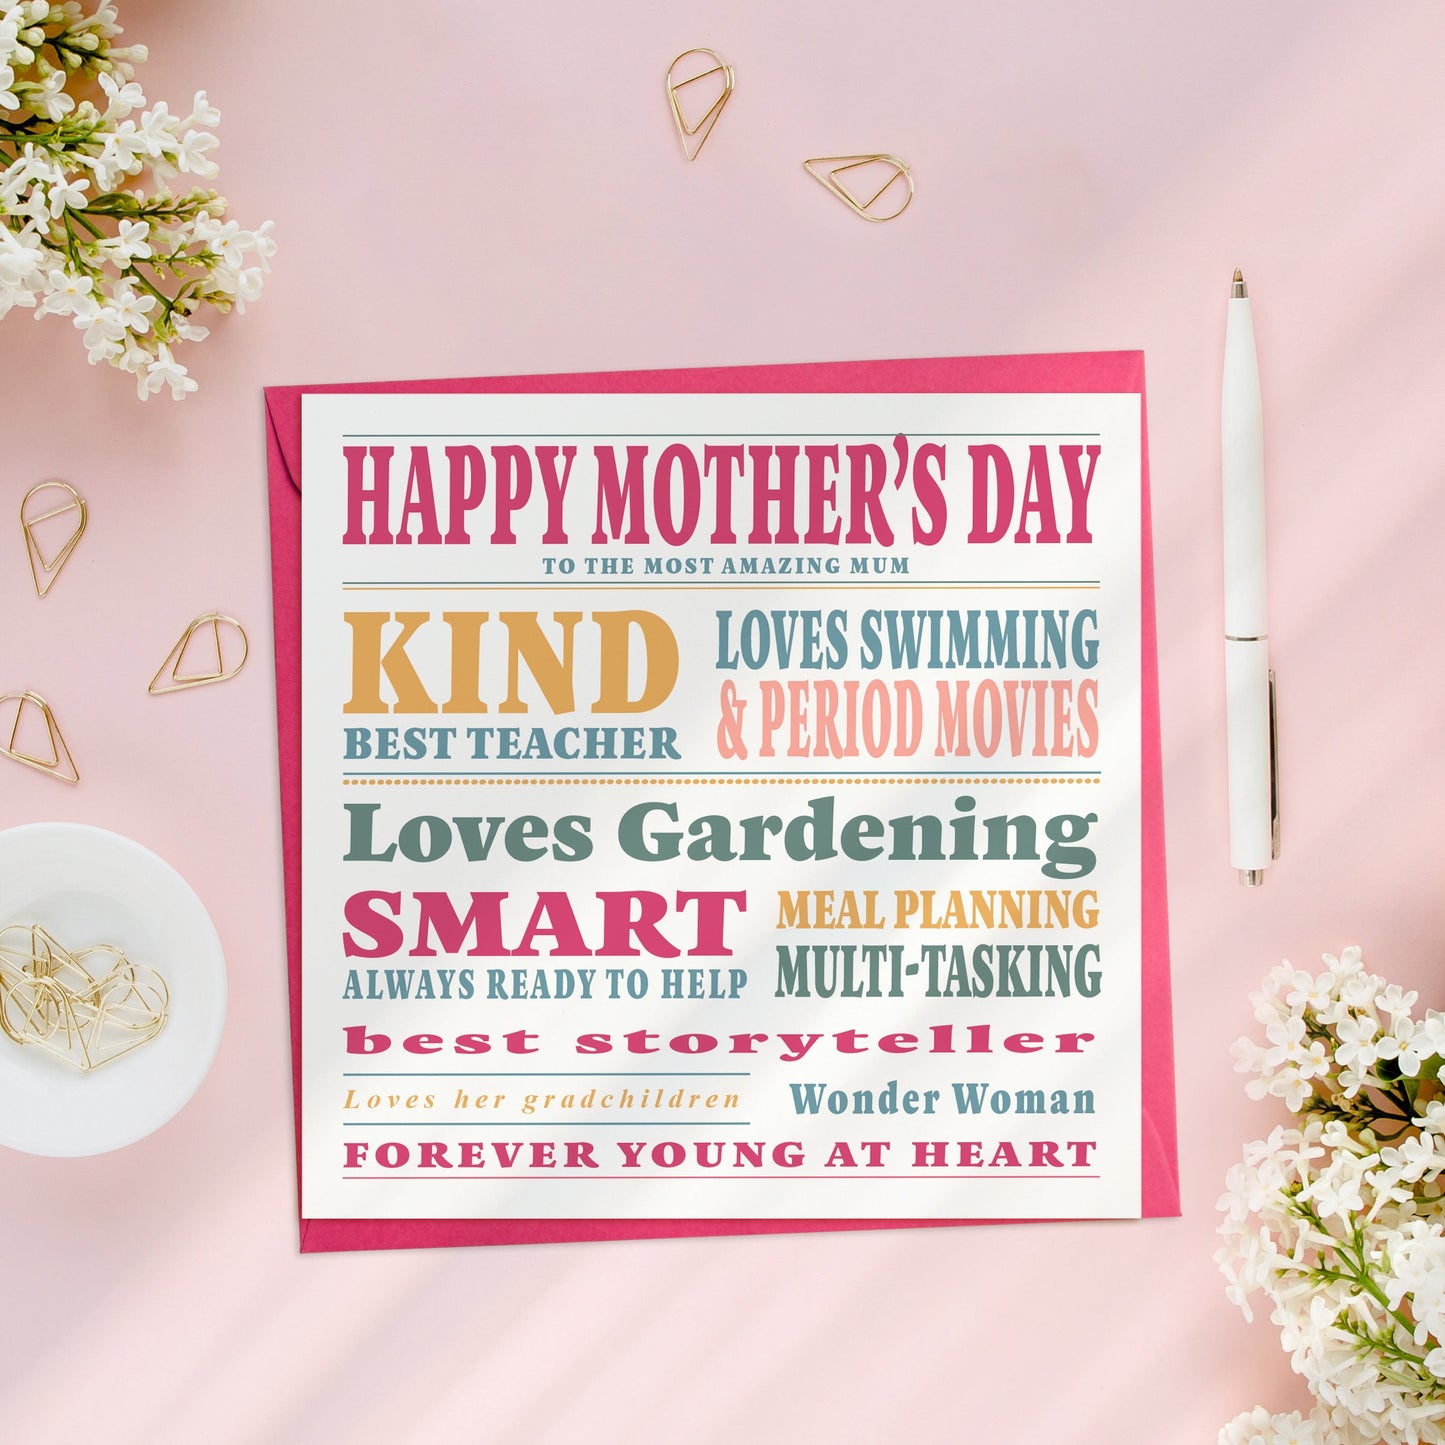 Personalised Word Art Mother's Day Card, Colourful Mother's Day Cards, Mothers Day Card for Grandma, Special Words for Mum, Mum's Qualities